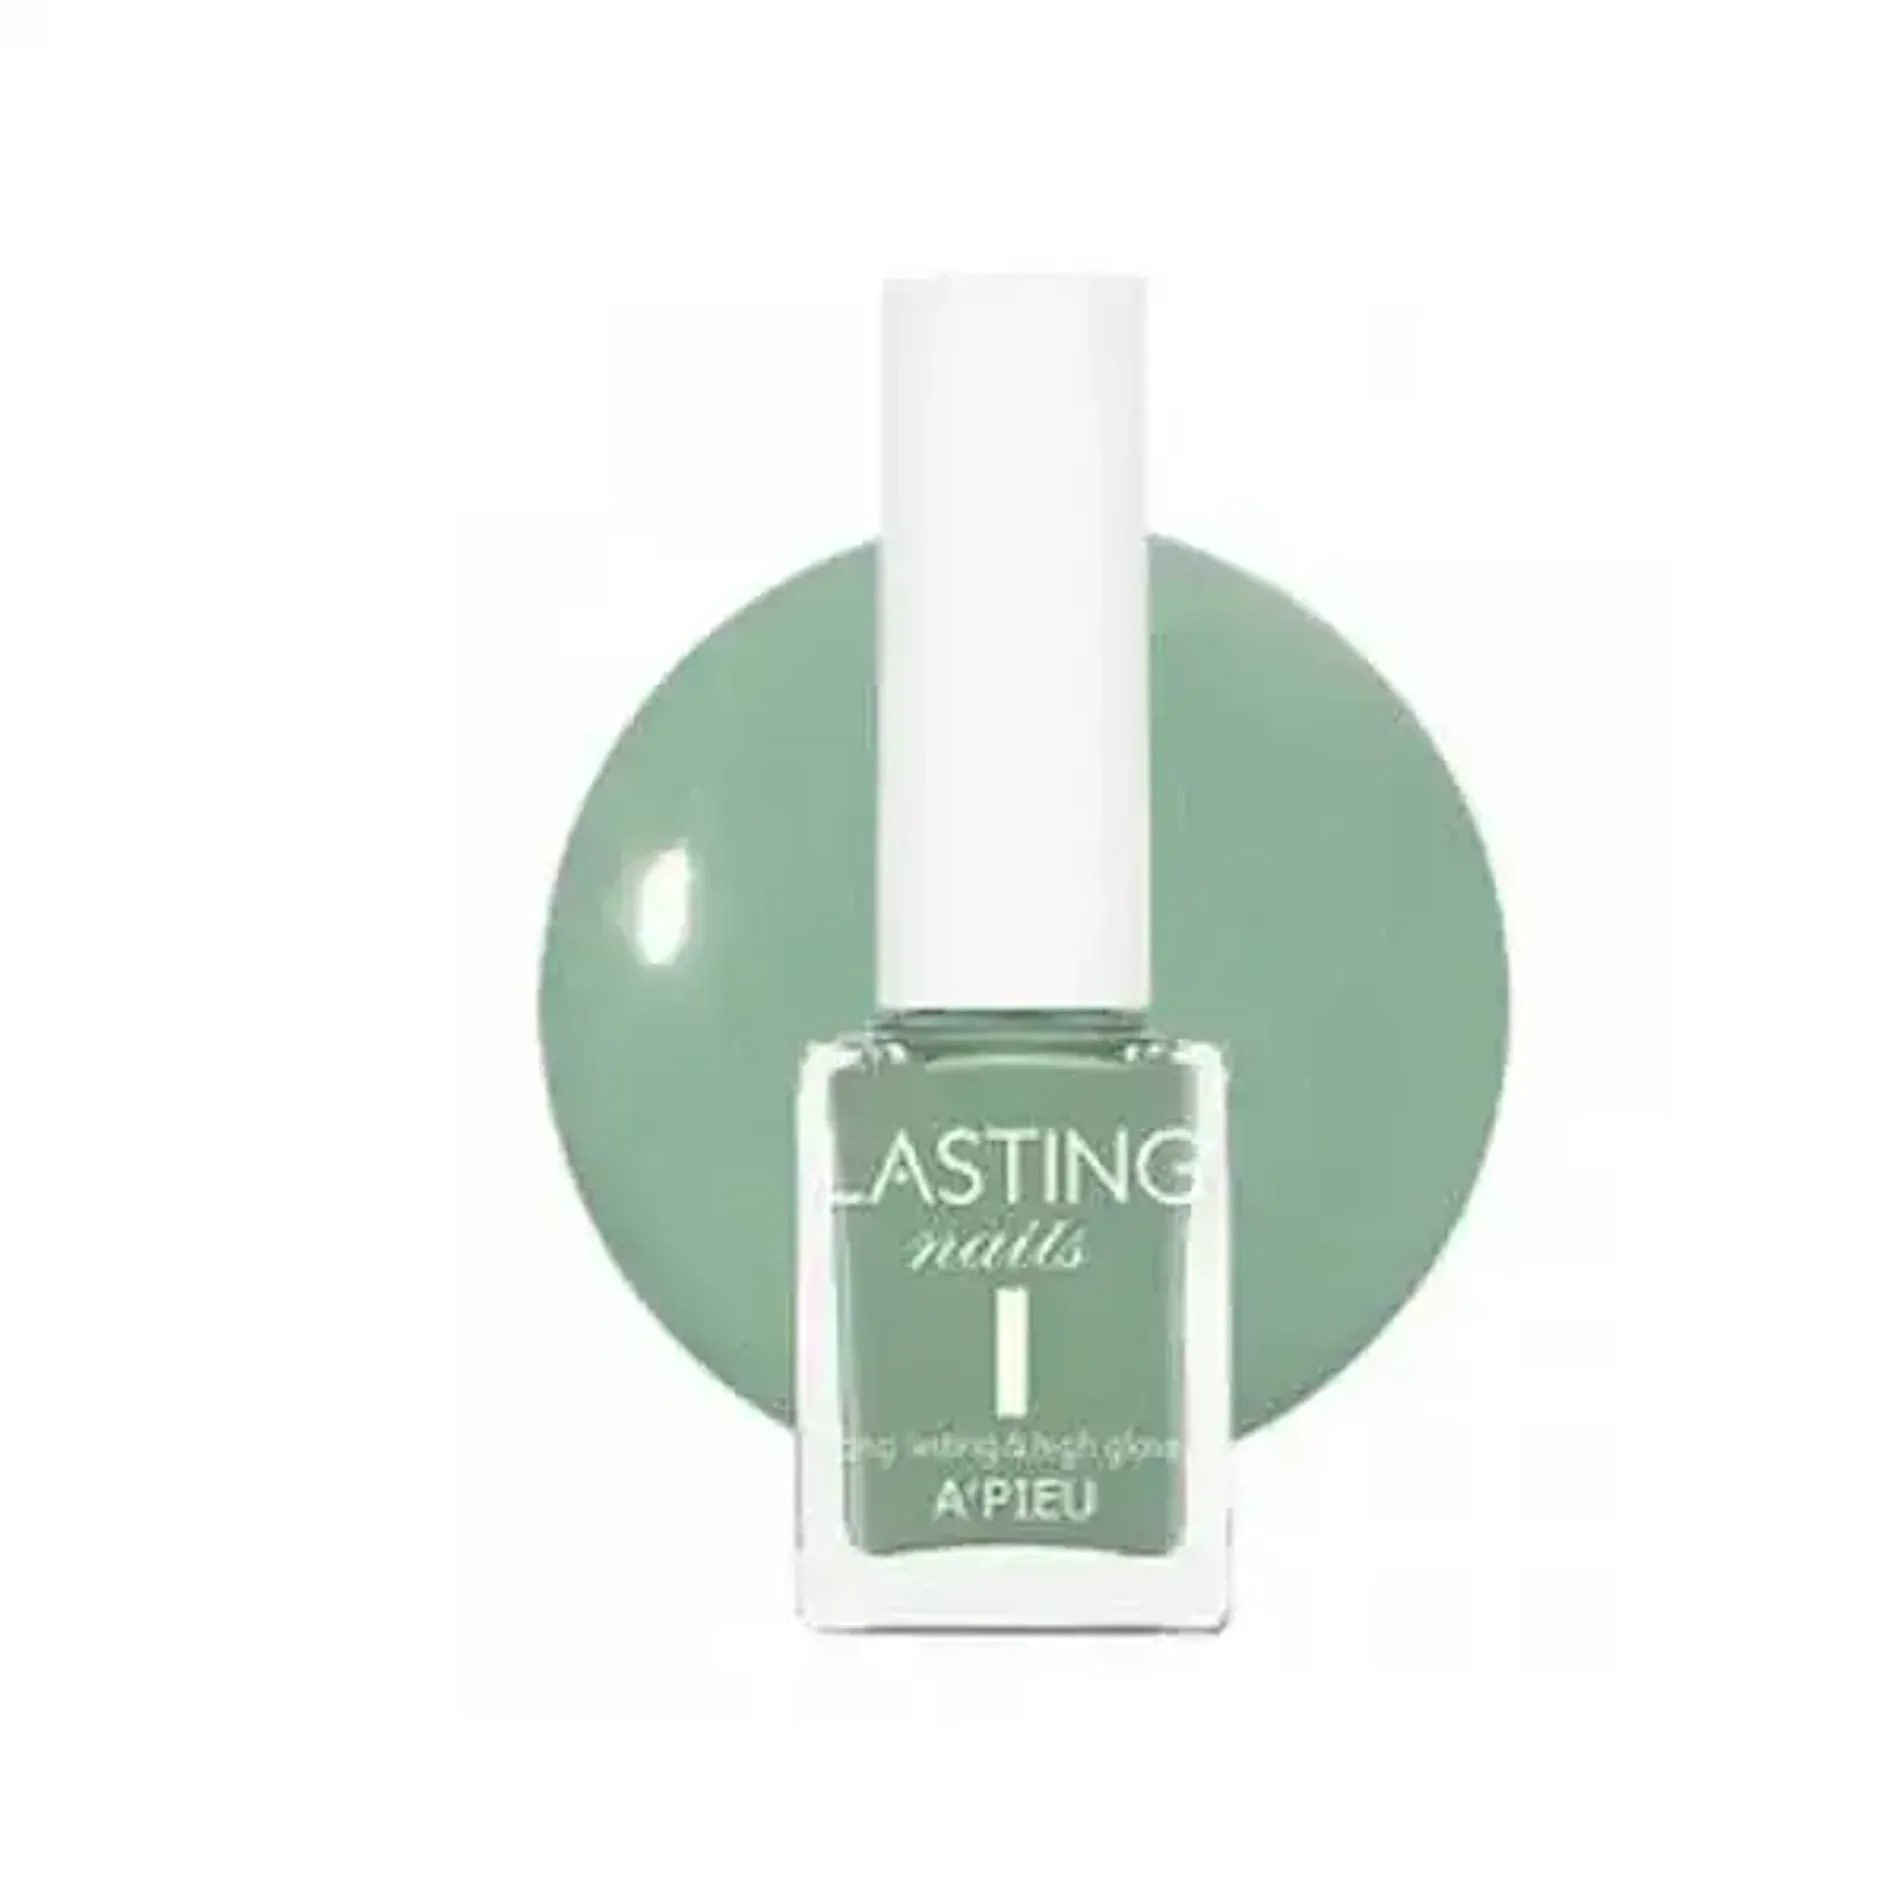 nuoc-son-mong-tay-a-pieu-lasting-nails-gr06-1